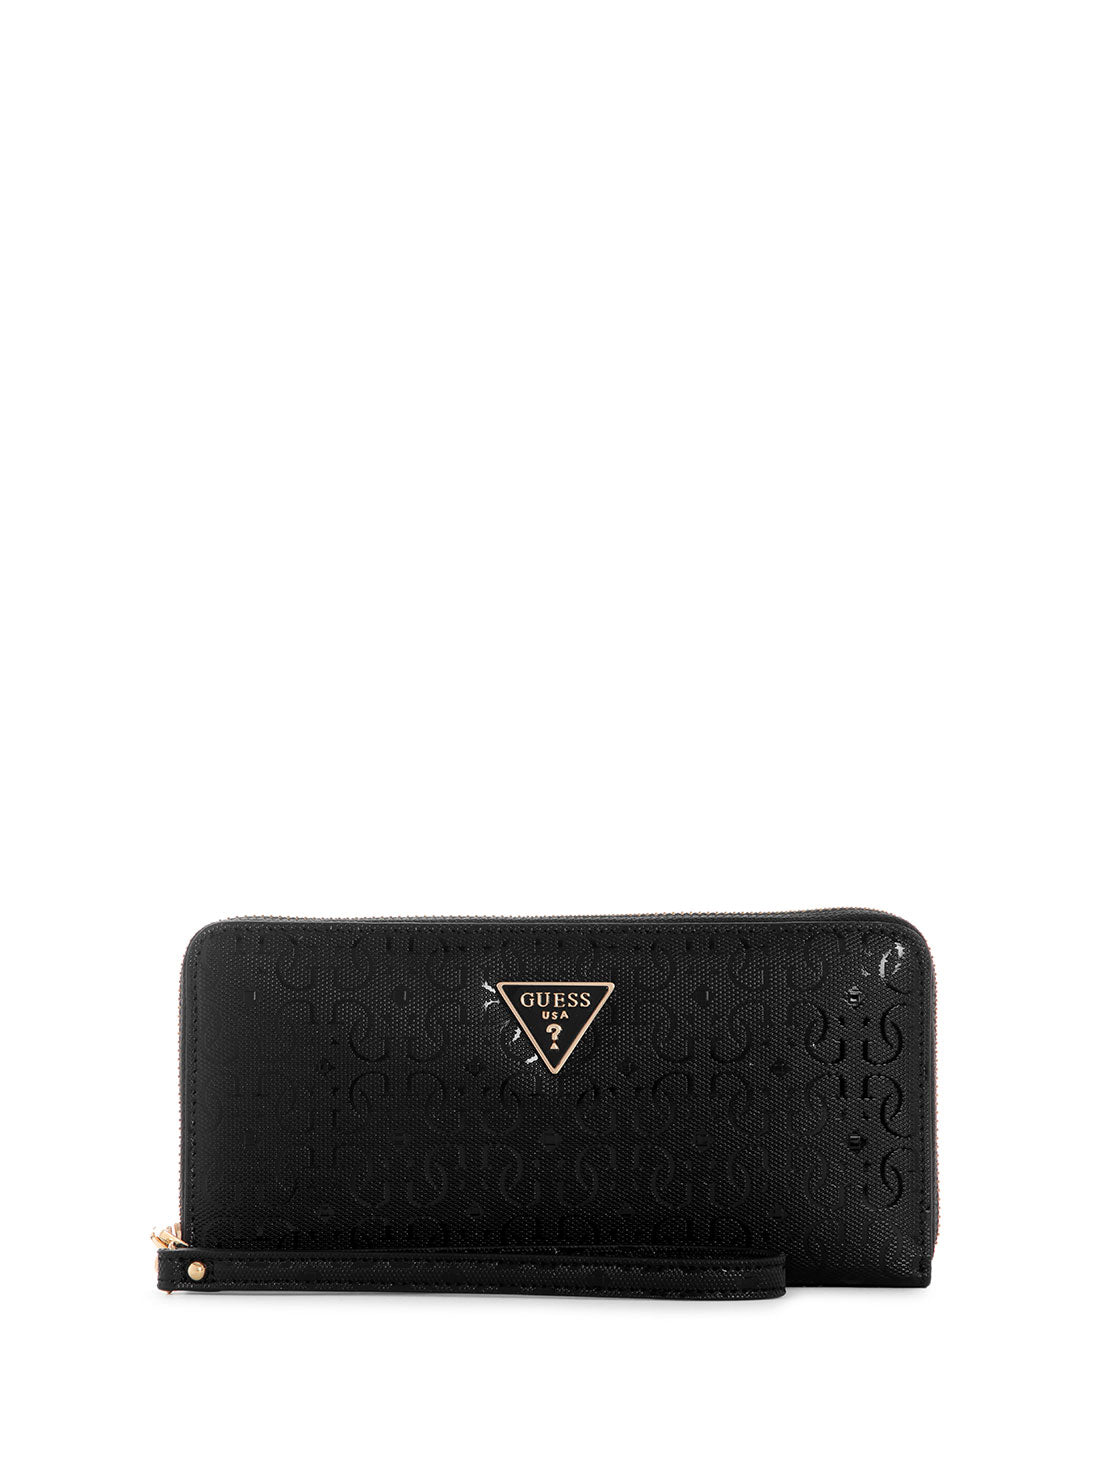 GUESS Women's Black Alexie Large Wallet GG841646 Front View